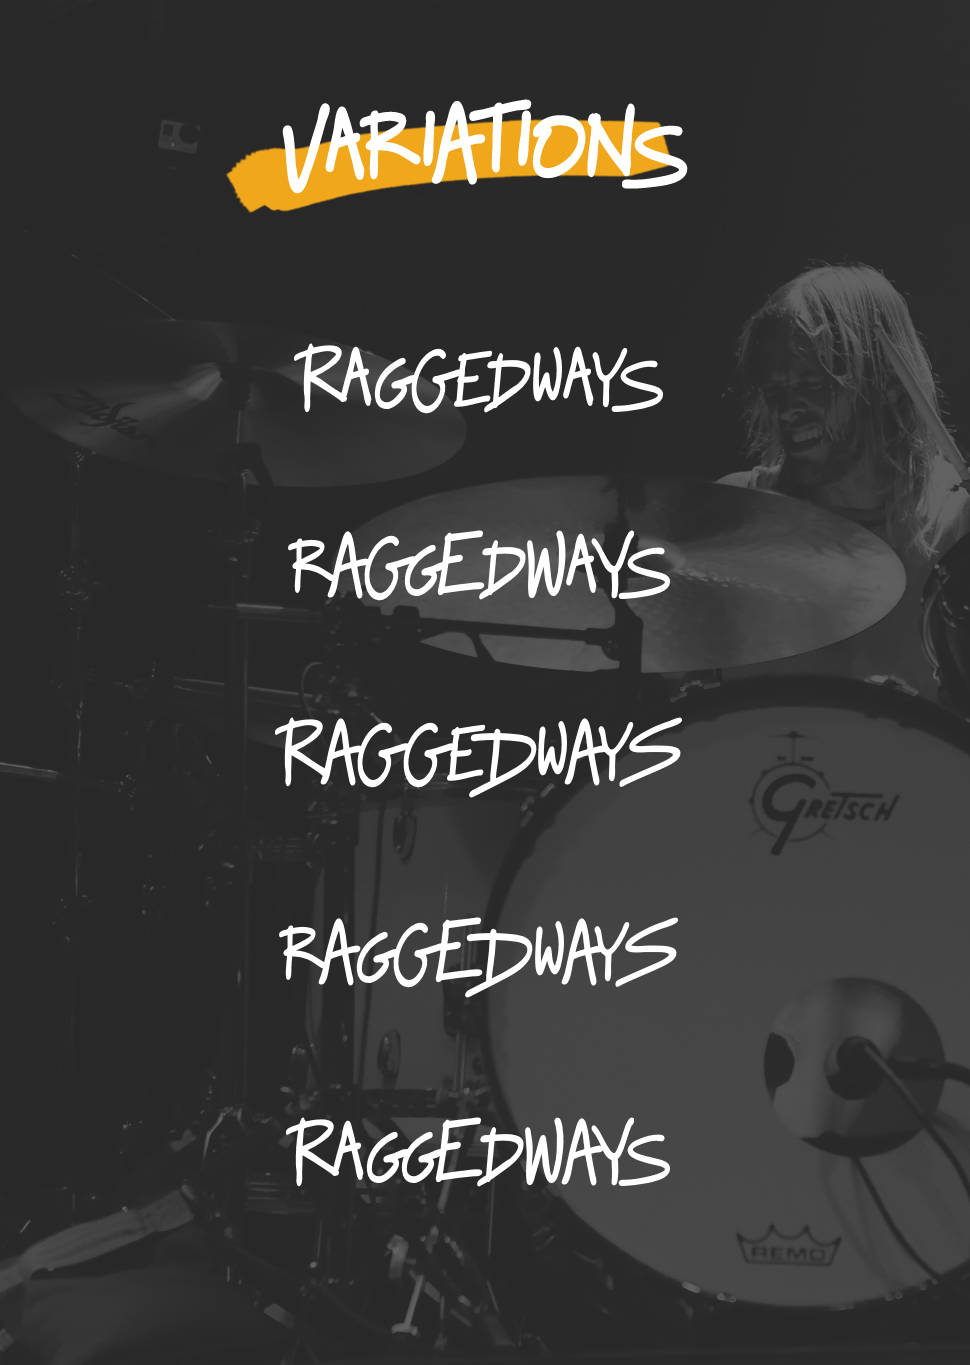 Raggedways free Typeface foo fighters handmade hand Dave Grohl Taylor Hawkins Nate Mendel Pat Smear Chris Shiflett download